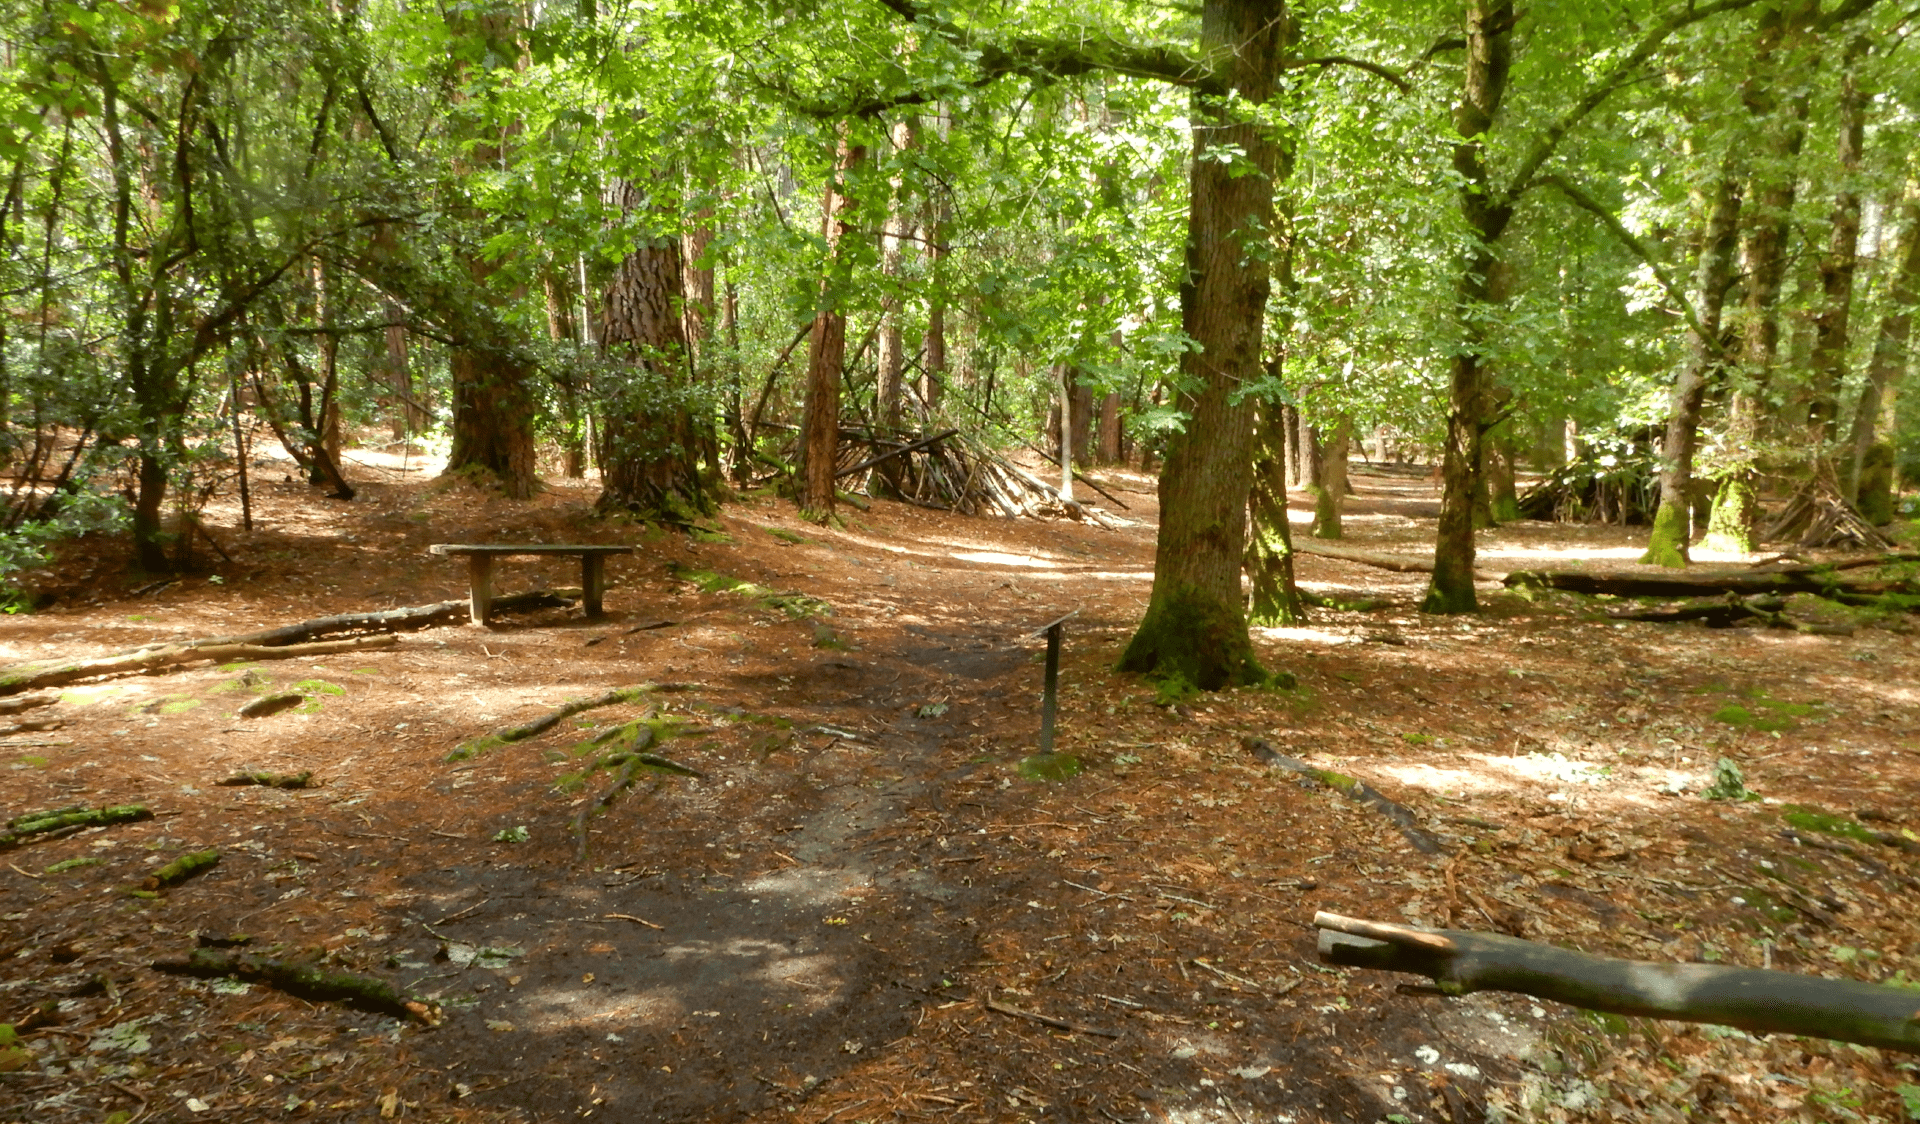 A walking path through the trees in Creswick Regional Park